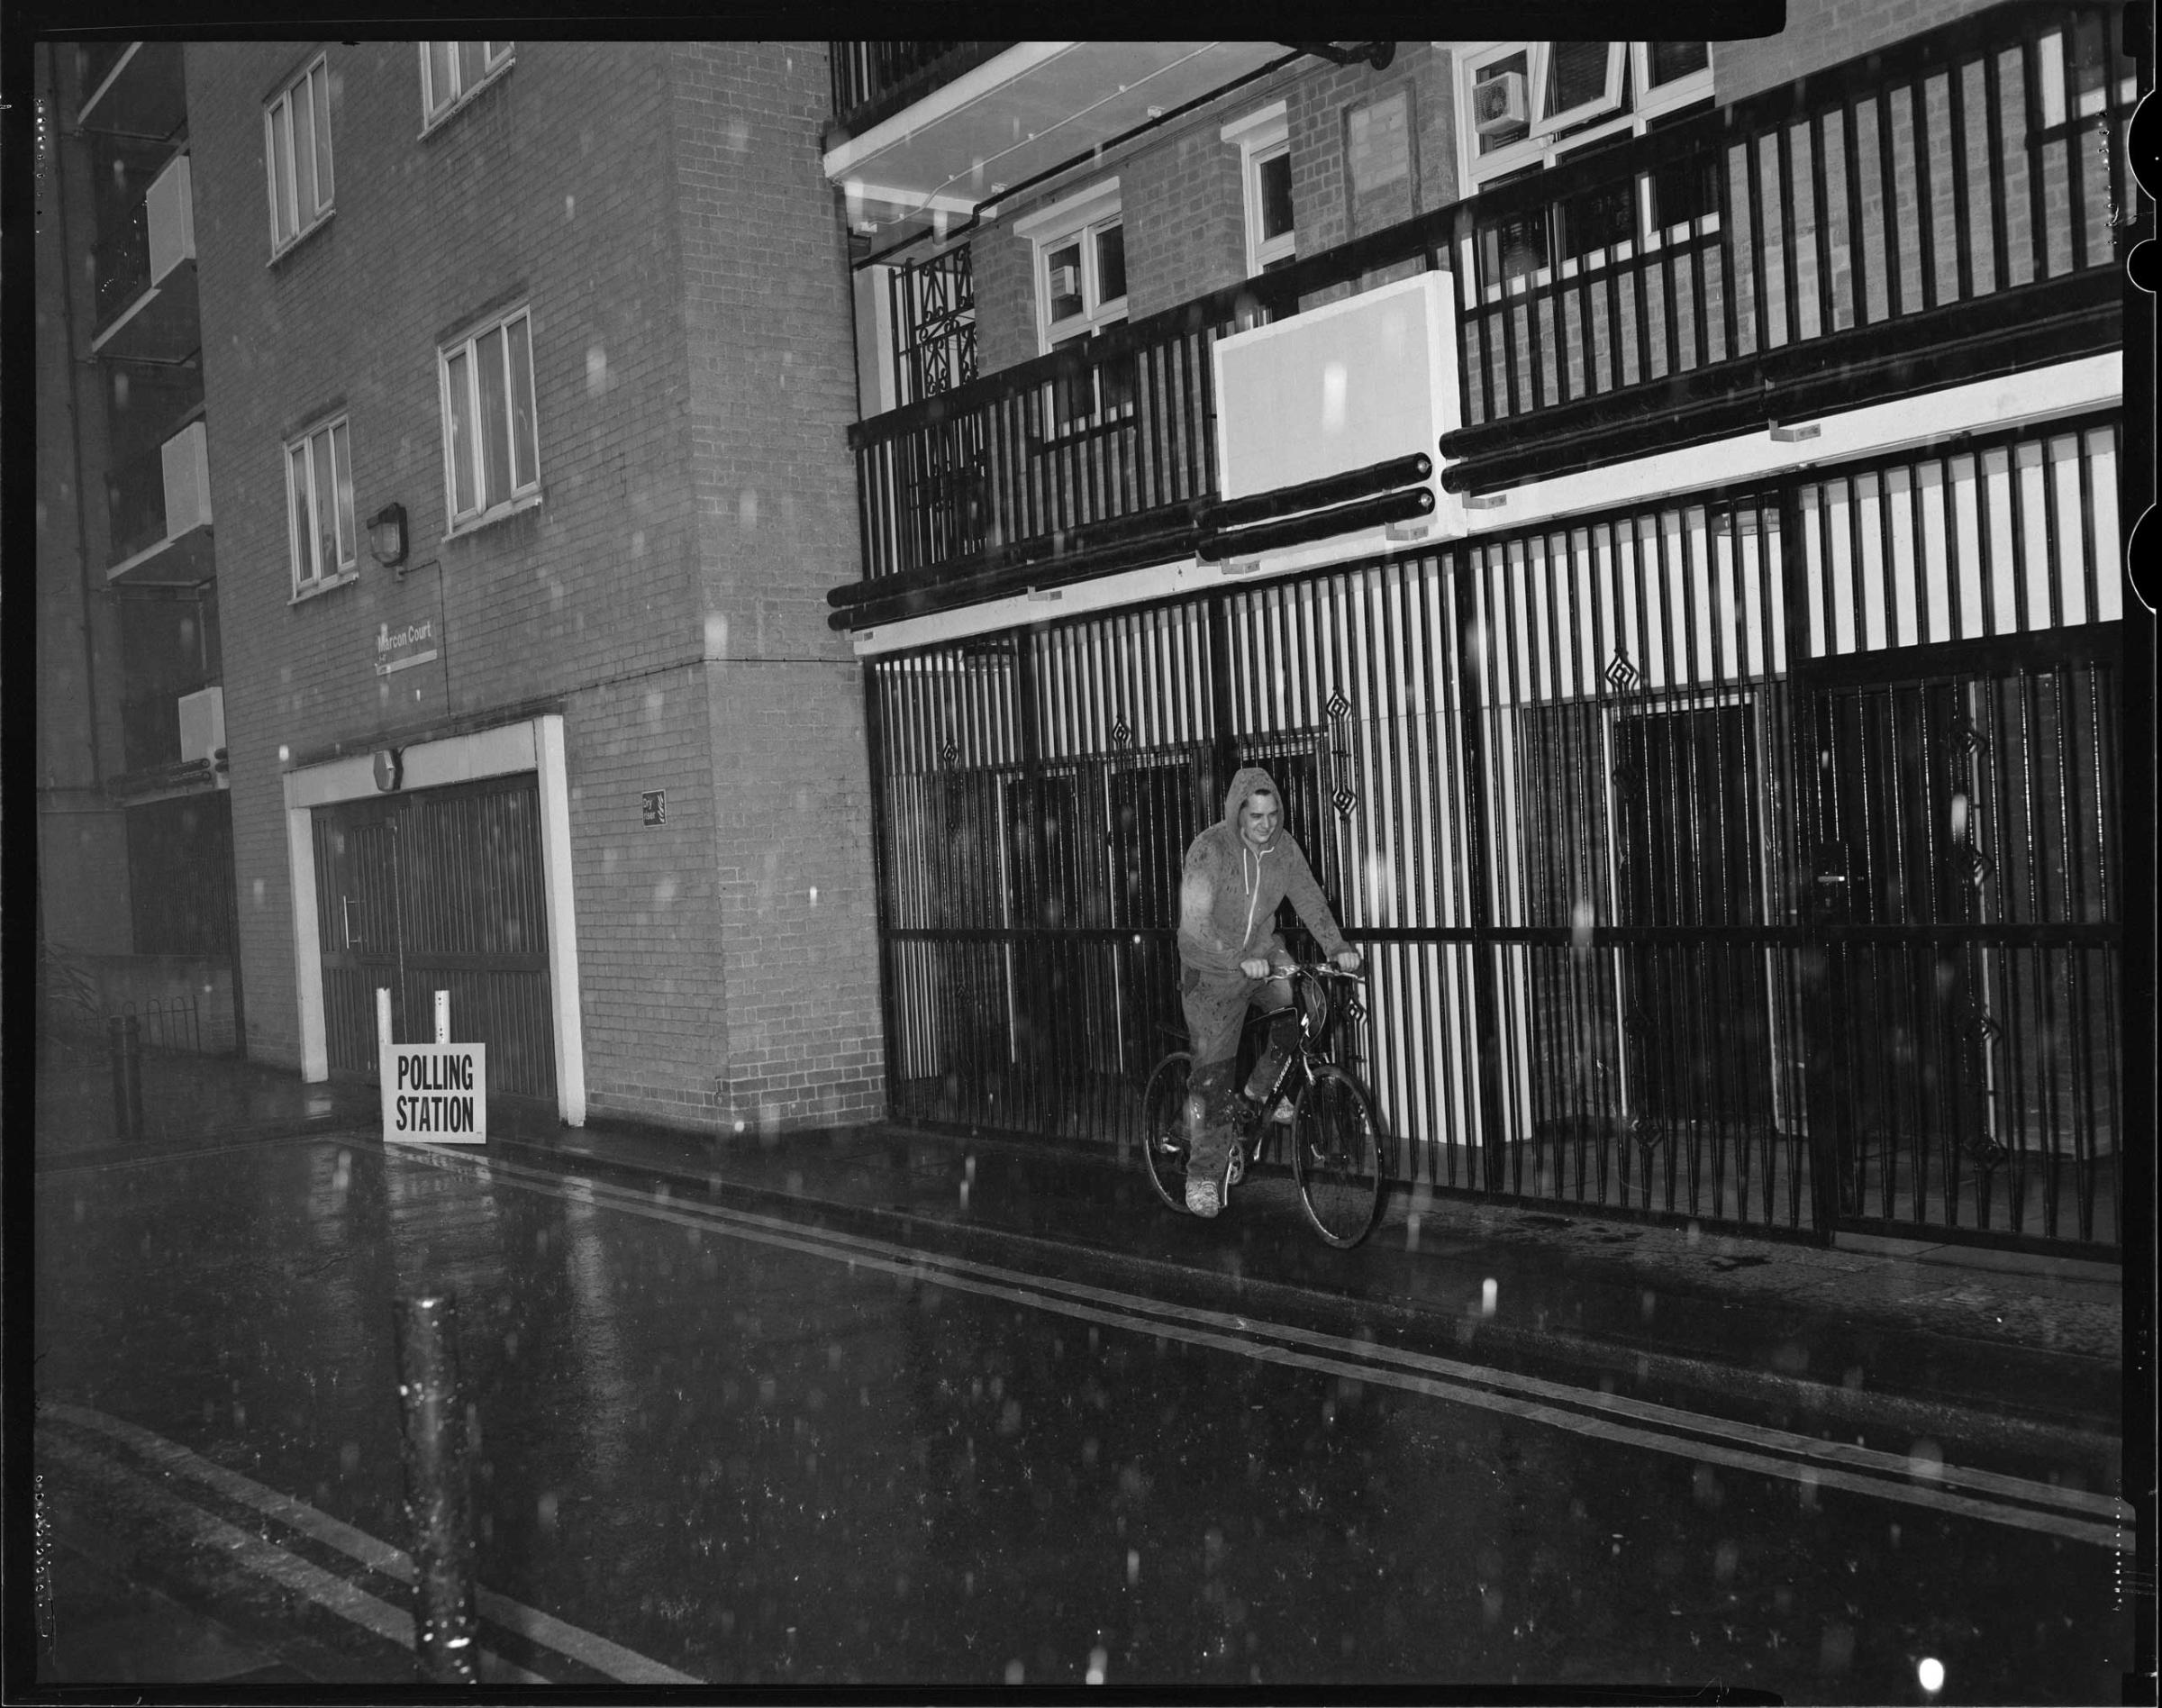 “There was nobody in the polling station when I went to vote, probably (hopefully I thought) because of the torrential rain coming down outside. ‘Are you documenting the determination to vote?!’ shouted a passer-by. The moment seemed friendly, light and very British. I went off feeling ultimately positive and so I was devastated this morning to wake up to the news that we had collectively made this huge, stupid, irreversible decision.” London, UK, June 23, 2016.